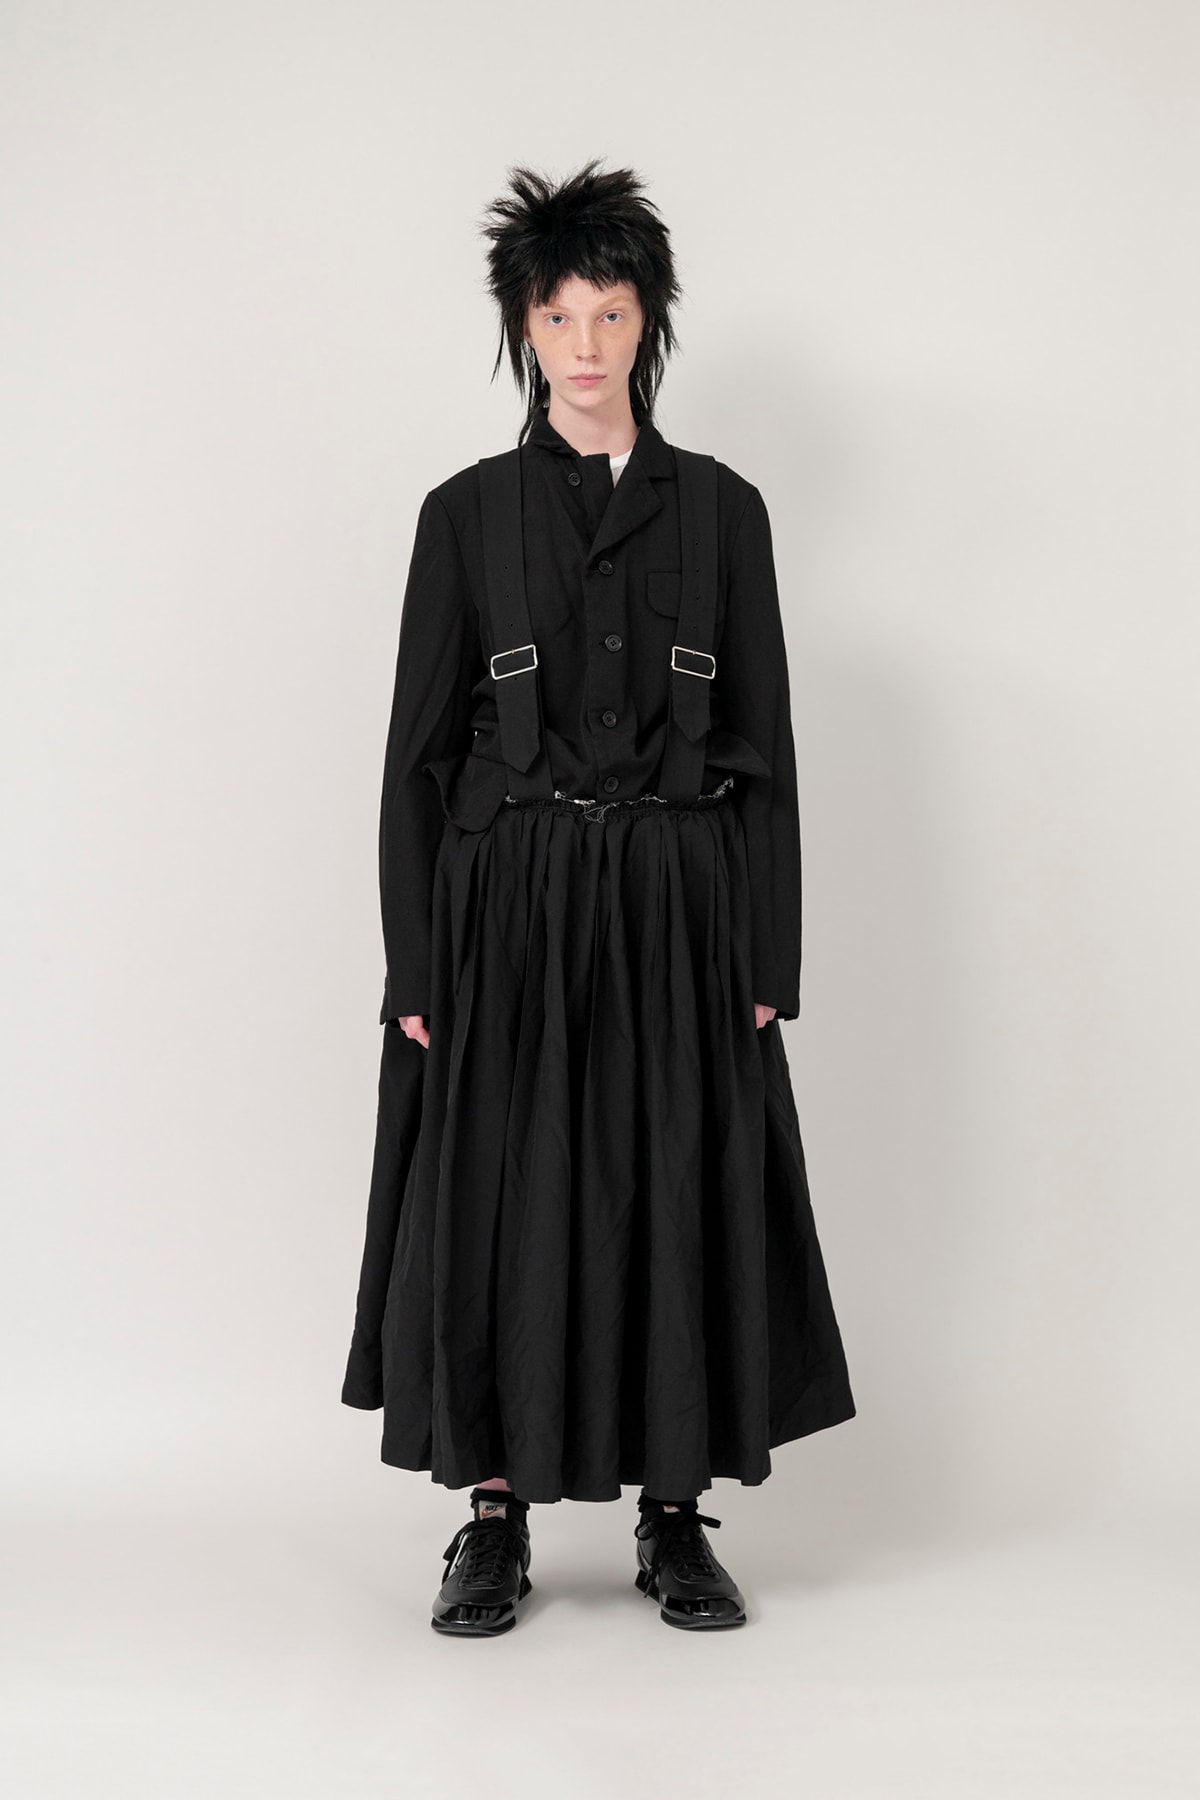 Nike x BLACK COMME des GARCONS Fall/Winter 2019 Collection Suspender Skirt Shirt Black Womens